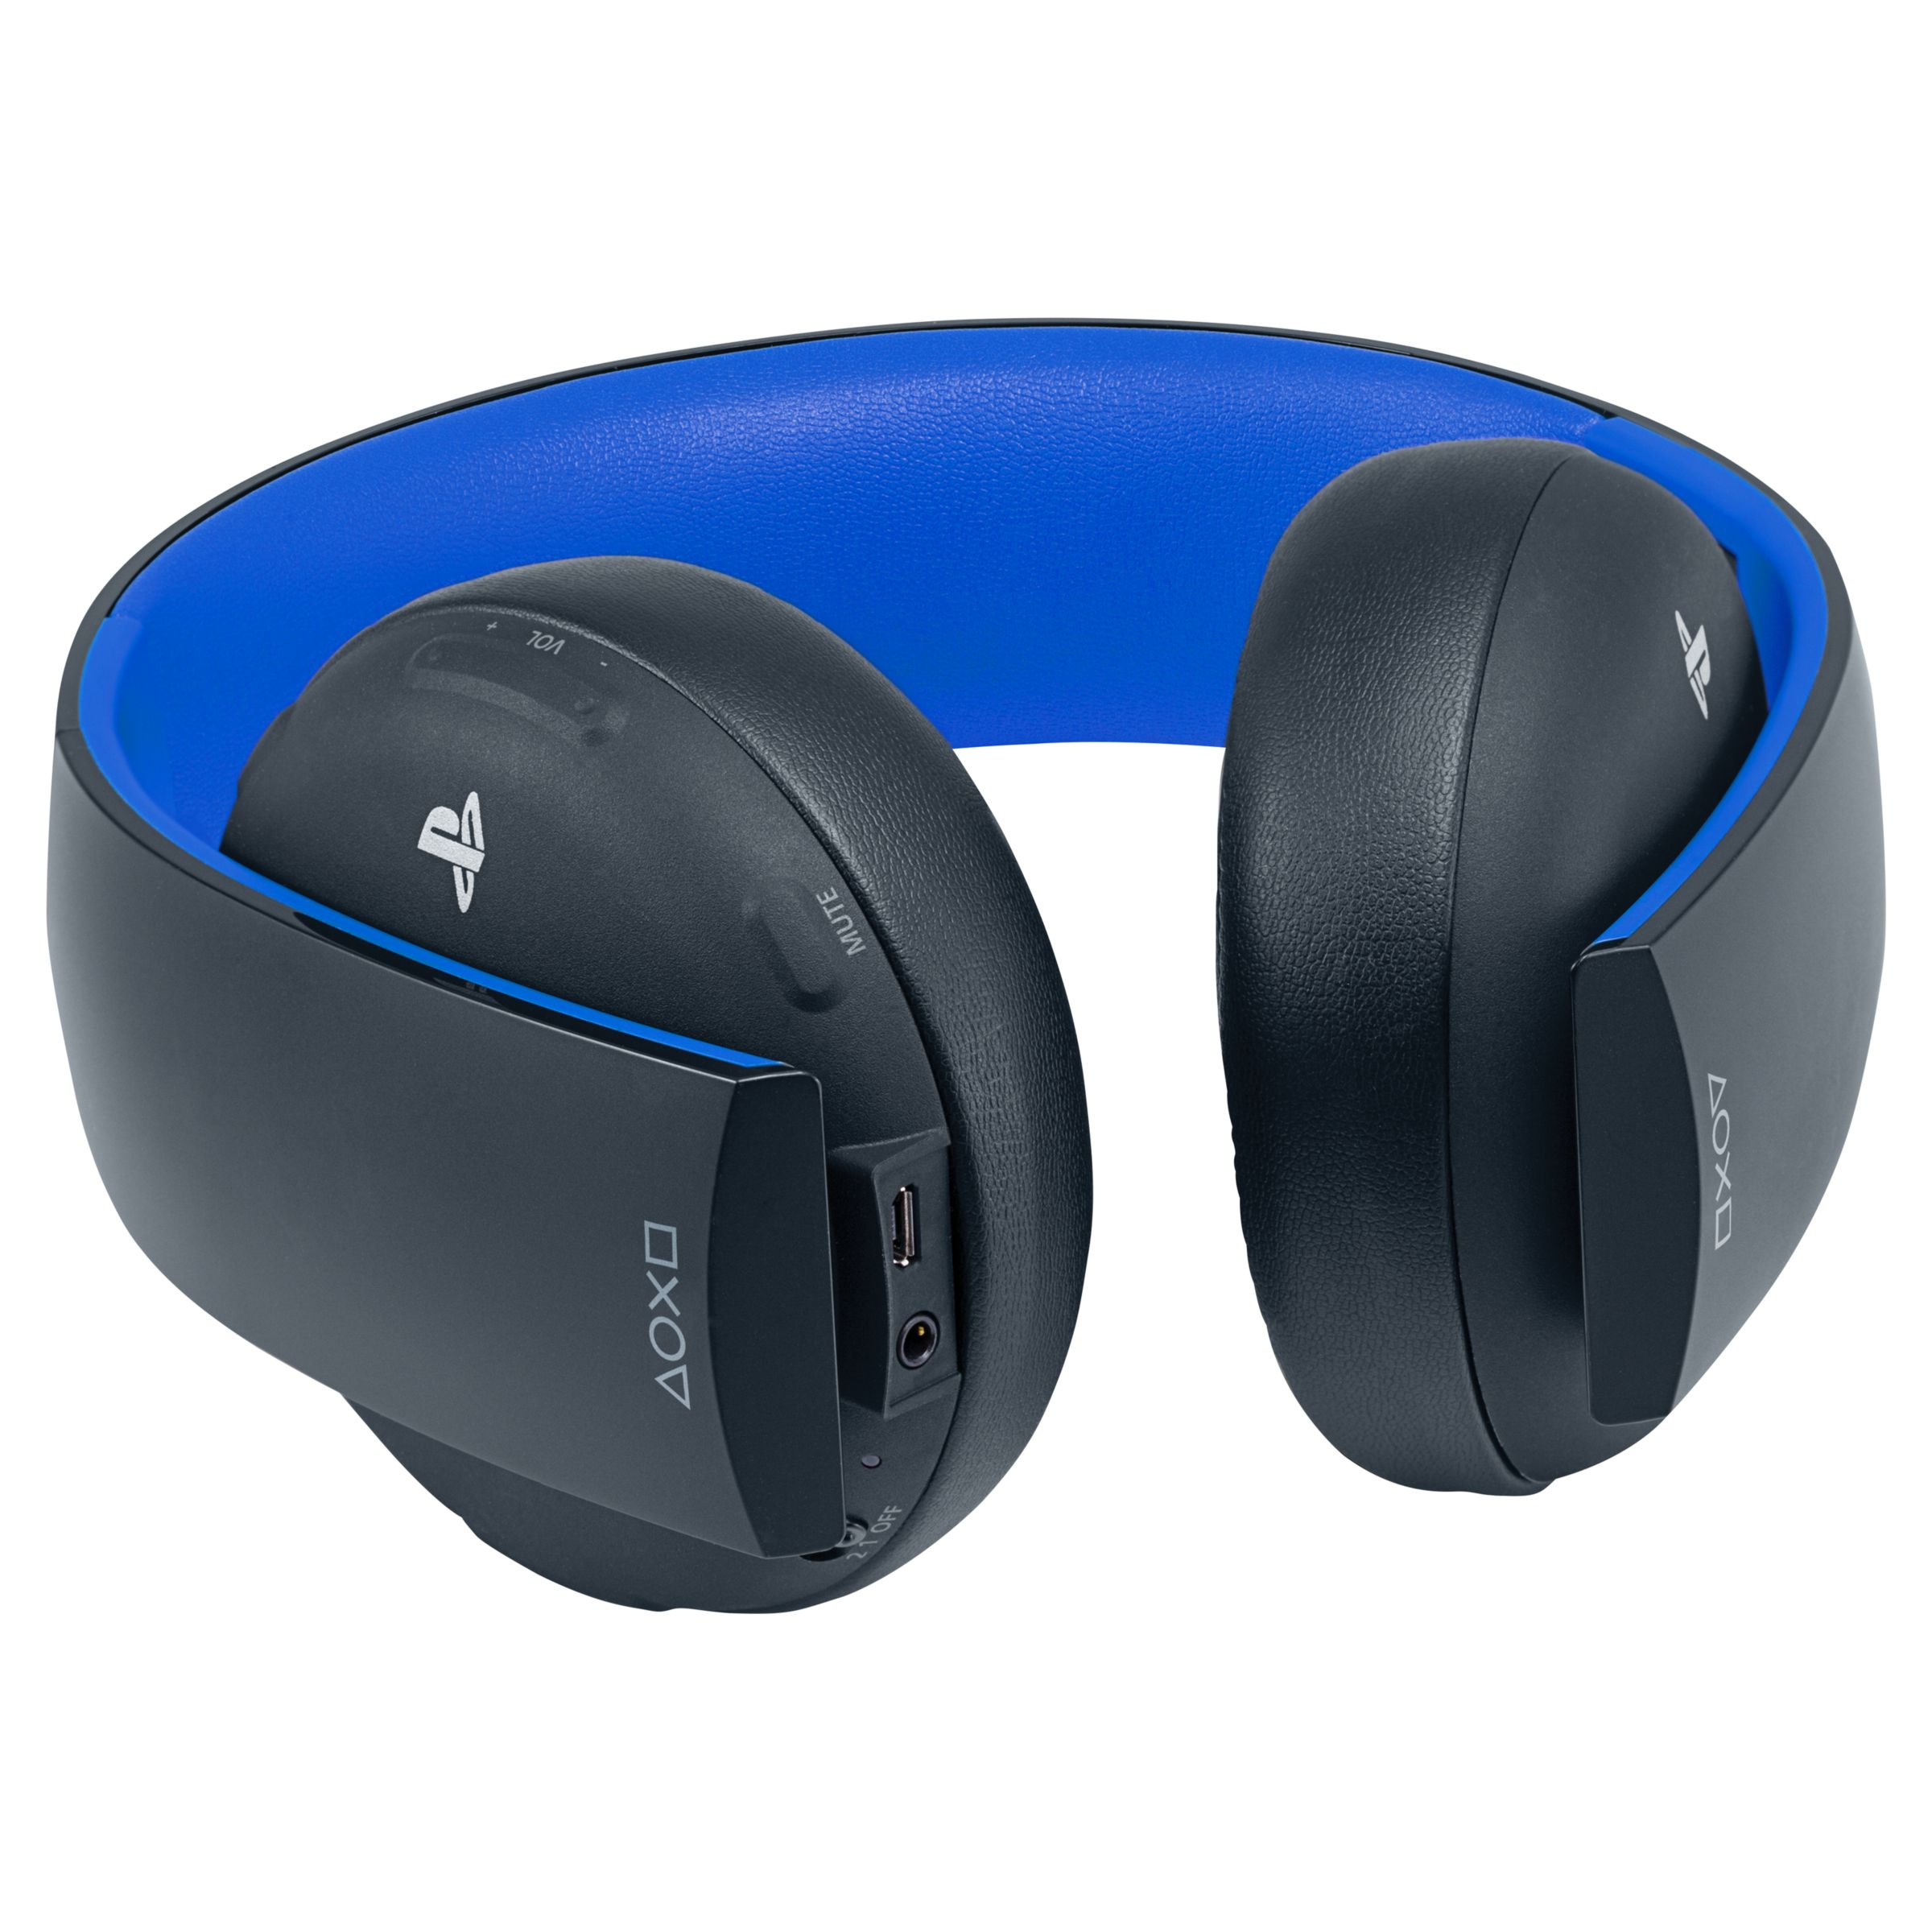 official sony ps4 headset